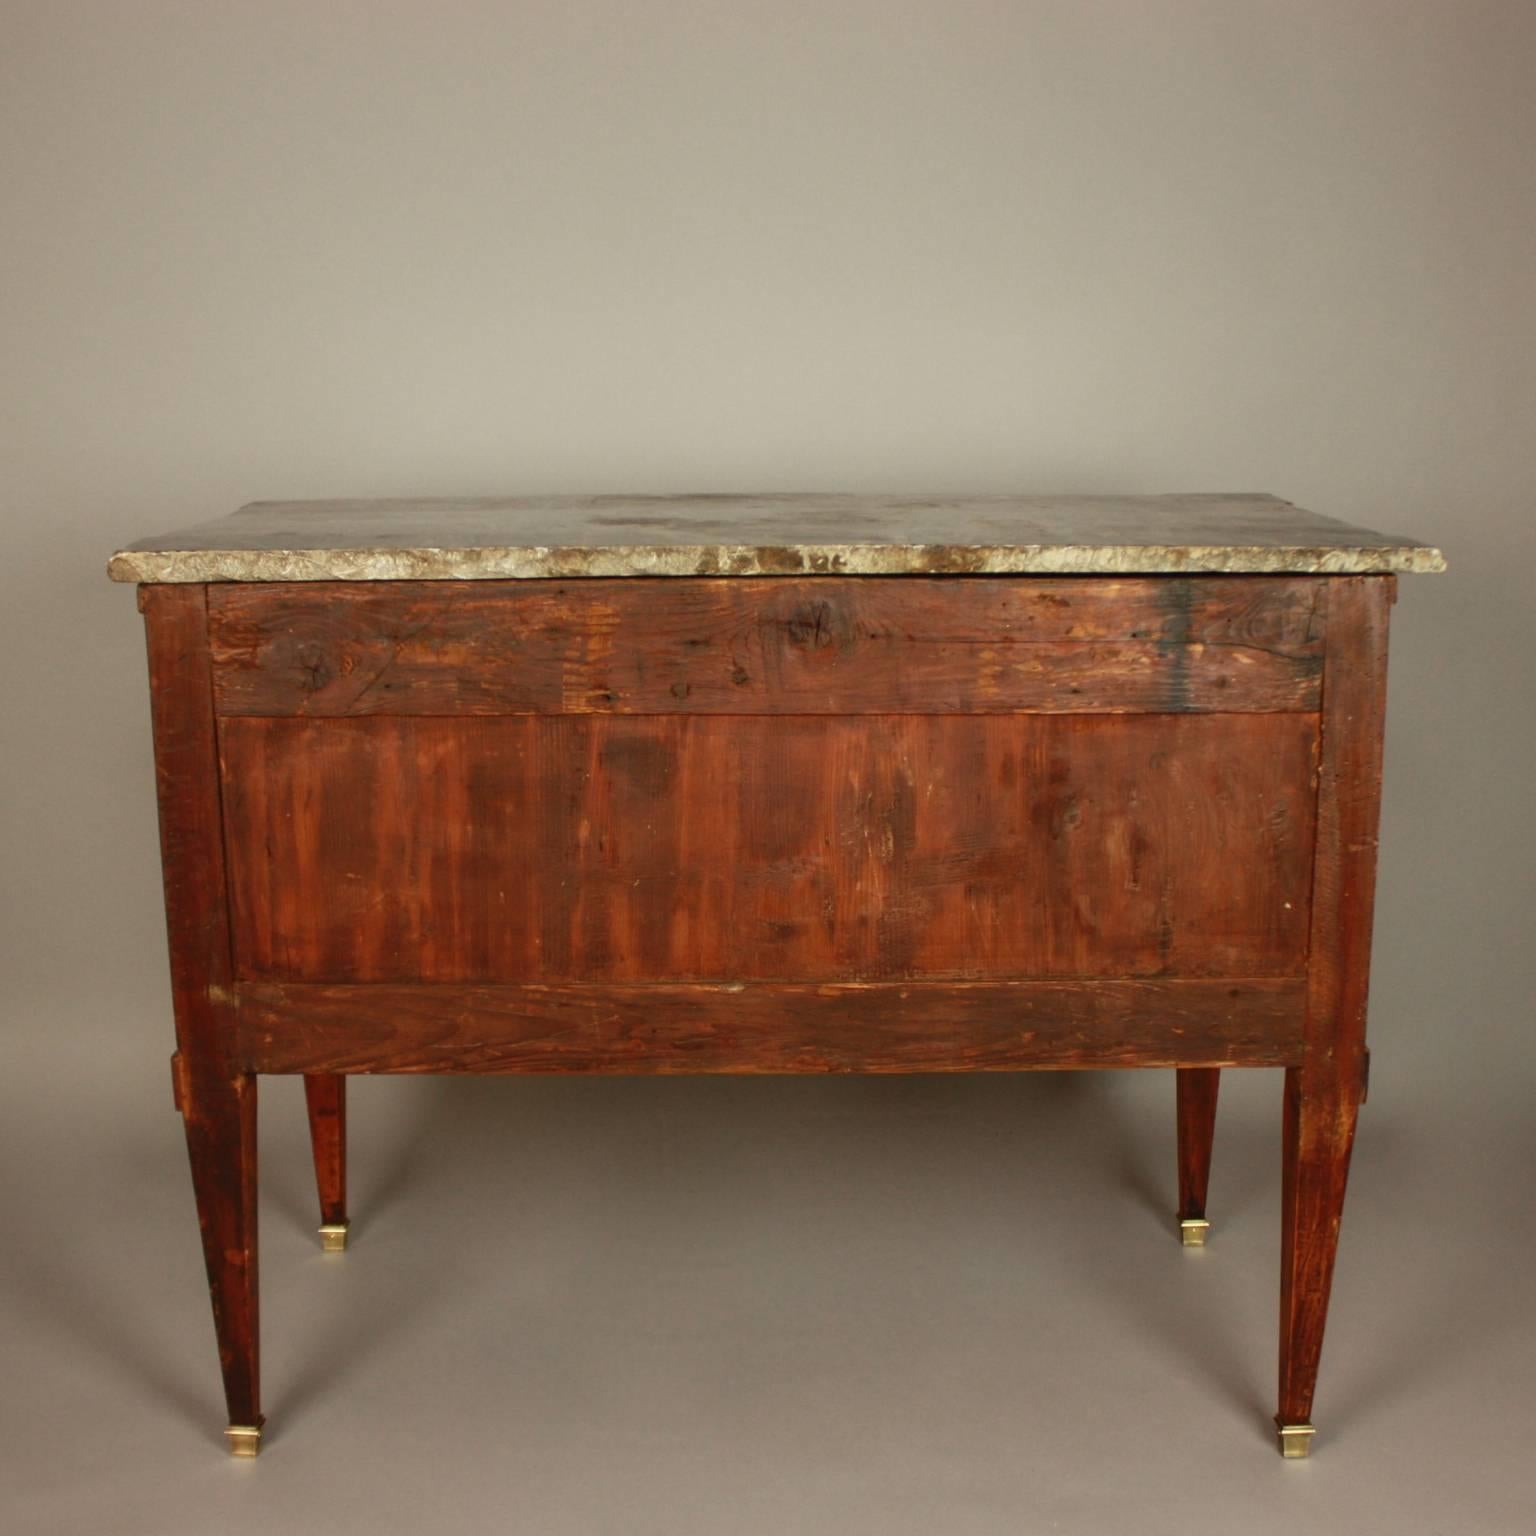 18th Century French Louis XVI Gilt-Bronze Mounted Geometrical Marquetry Commode For Sale 5